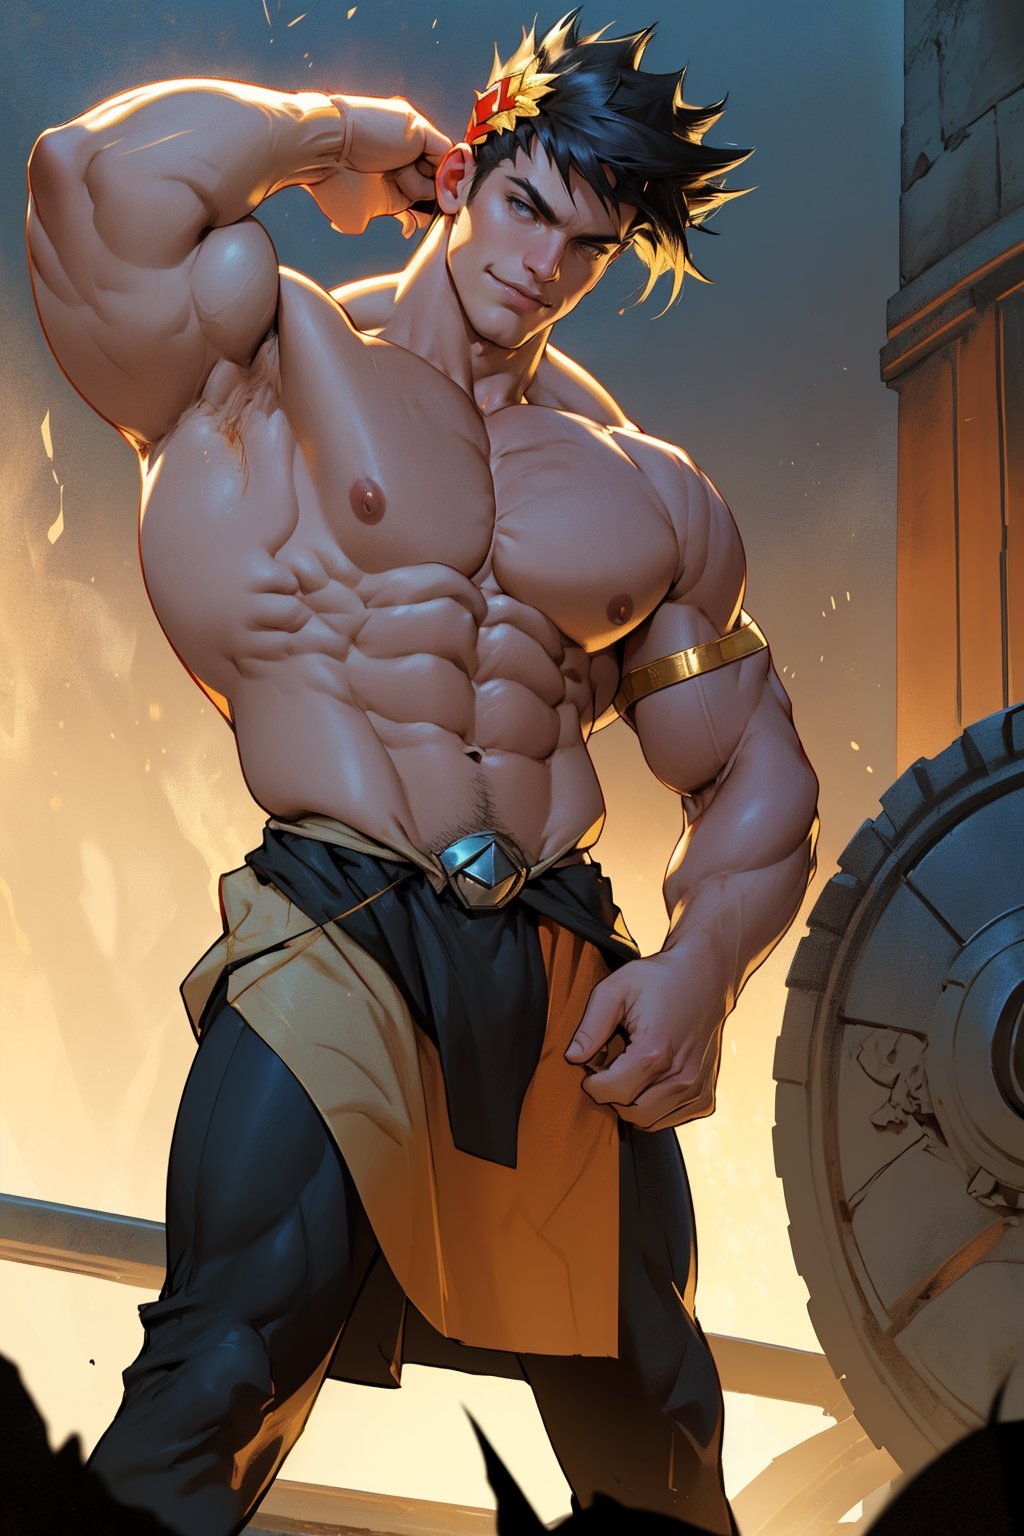 Close-up shot of Zagreus's powerful physique: broad shoulders, bulging biceps, and defined abs. His chiseled chest is highlighted under warm golden lighting, emphasizing the curves of his muscular frame as he stands confidently, feet shoulder-width apart, with a subtle smirk on his face, exuding strength and dominance.